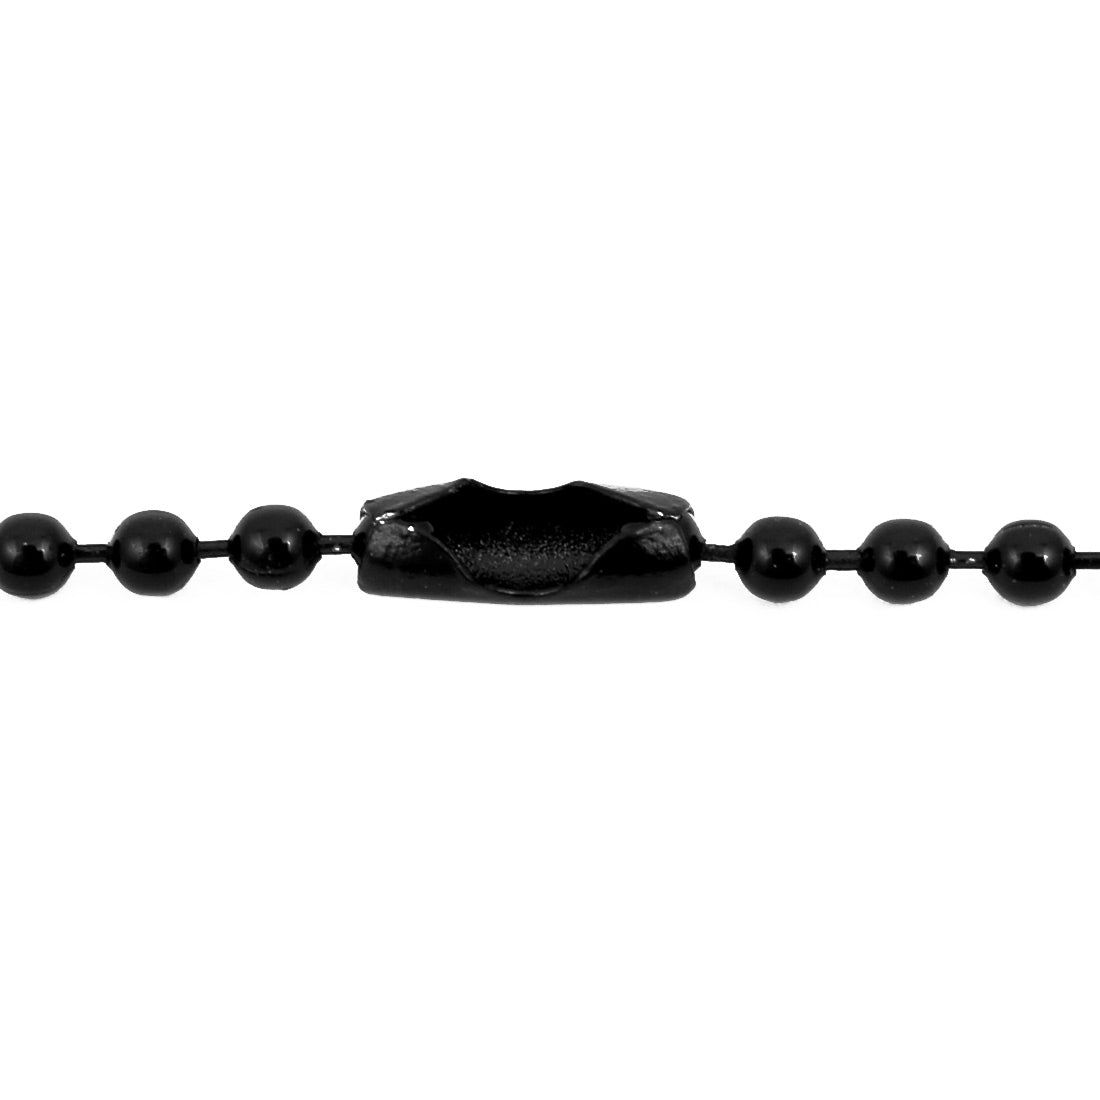 uxcell Uxcell 6Pcs Black Metal Bead Clasp Ball Connector Chain Keychain 2.4mm Dia 10cm Length